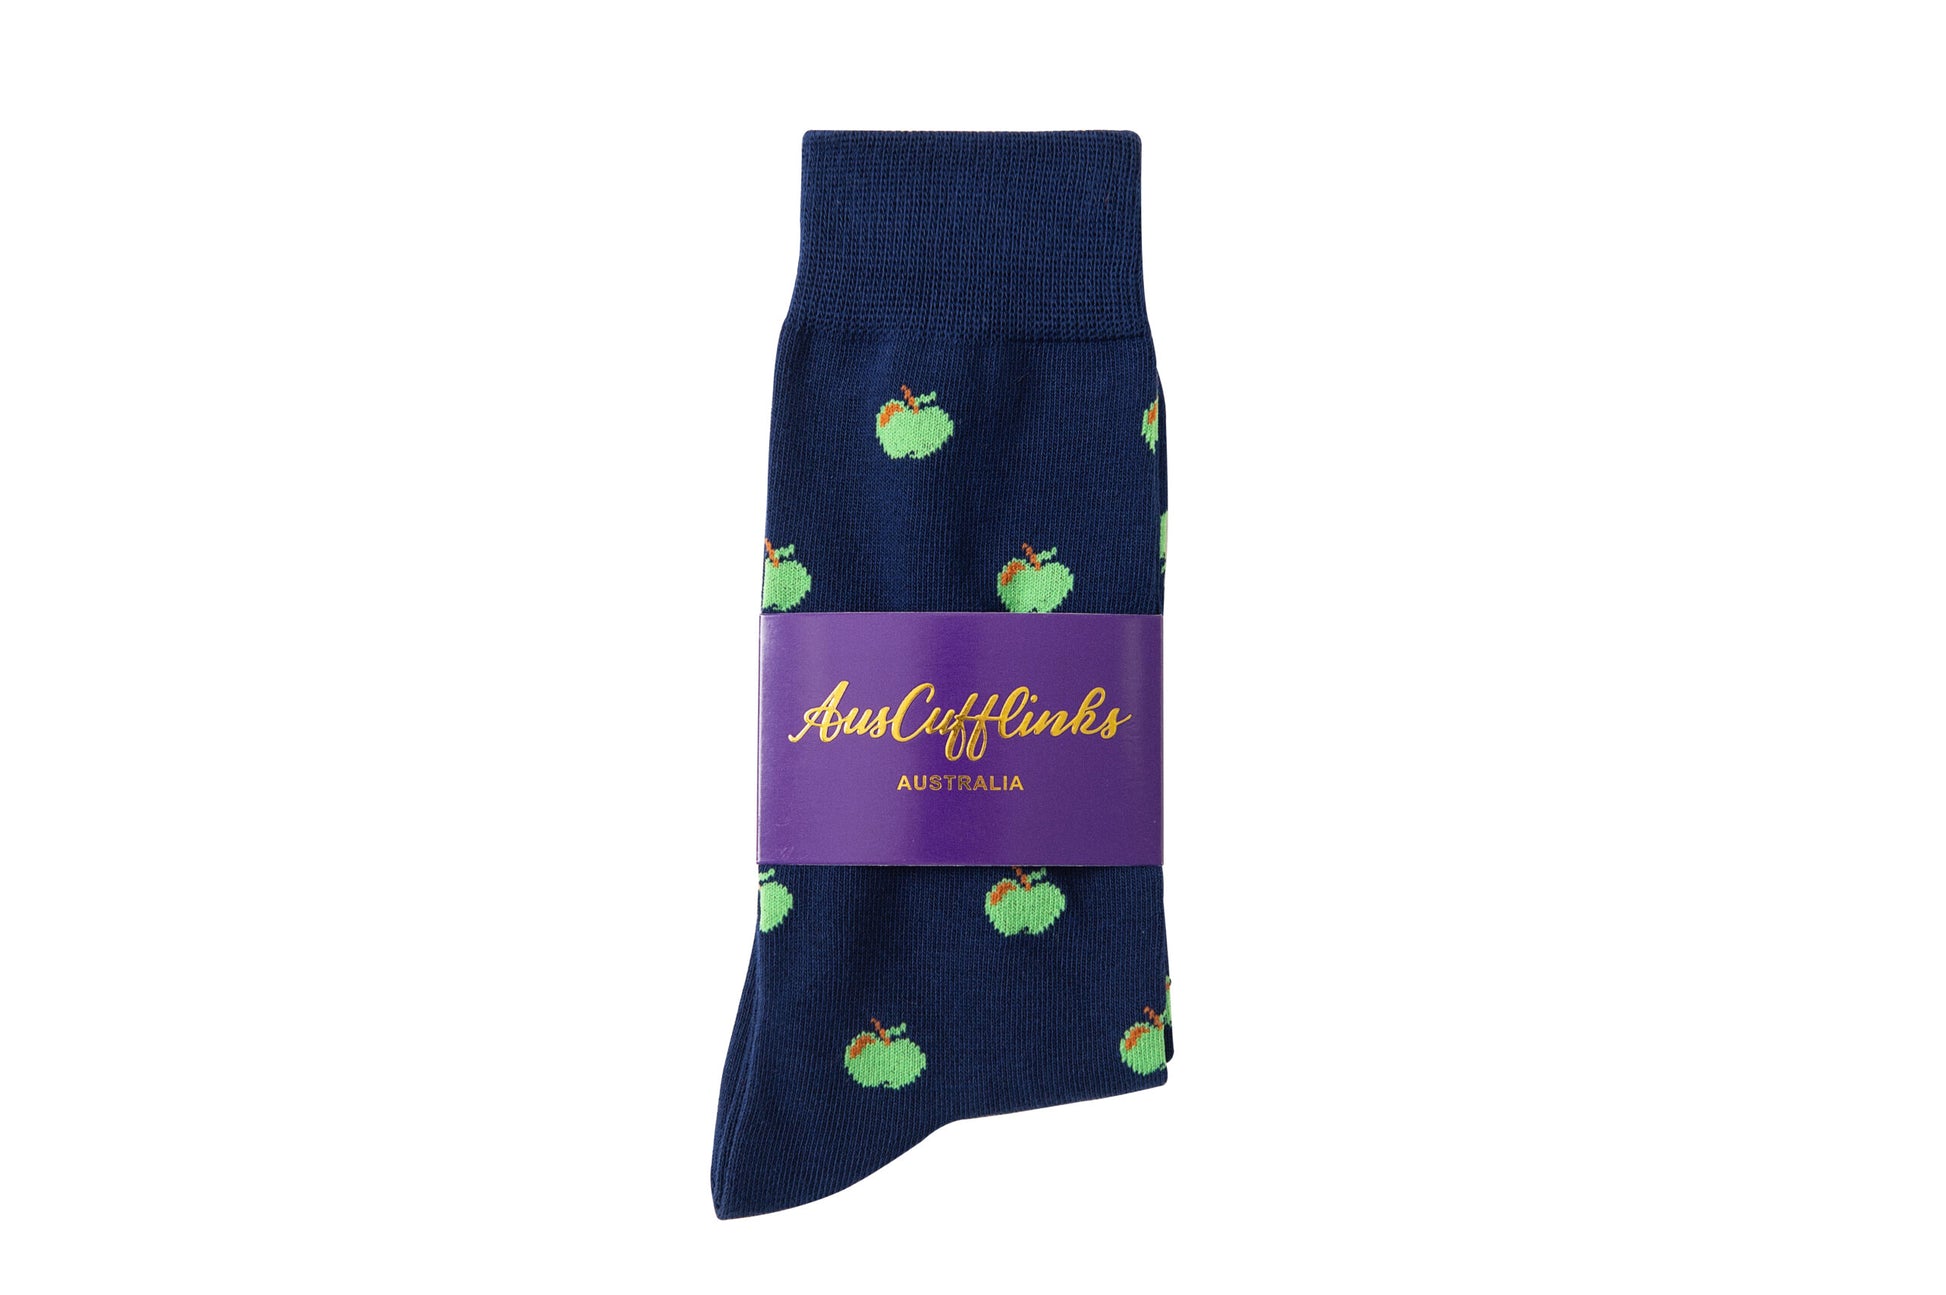 A pair of Apple Socks with green apples on a navy blue background.